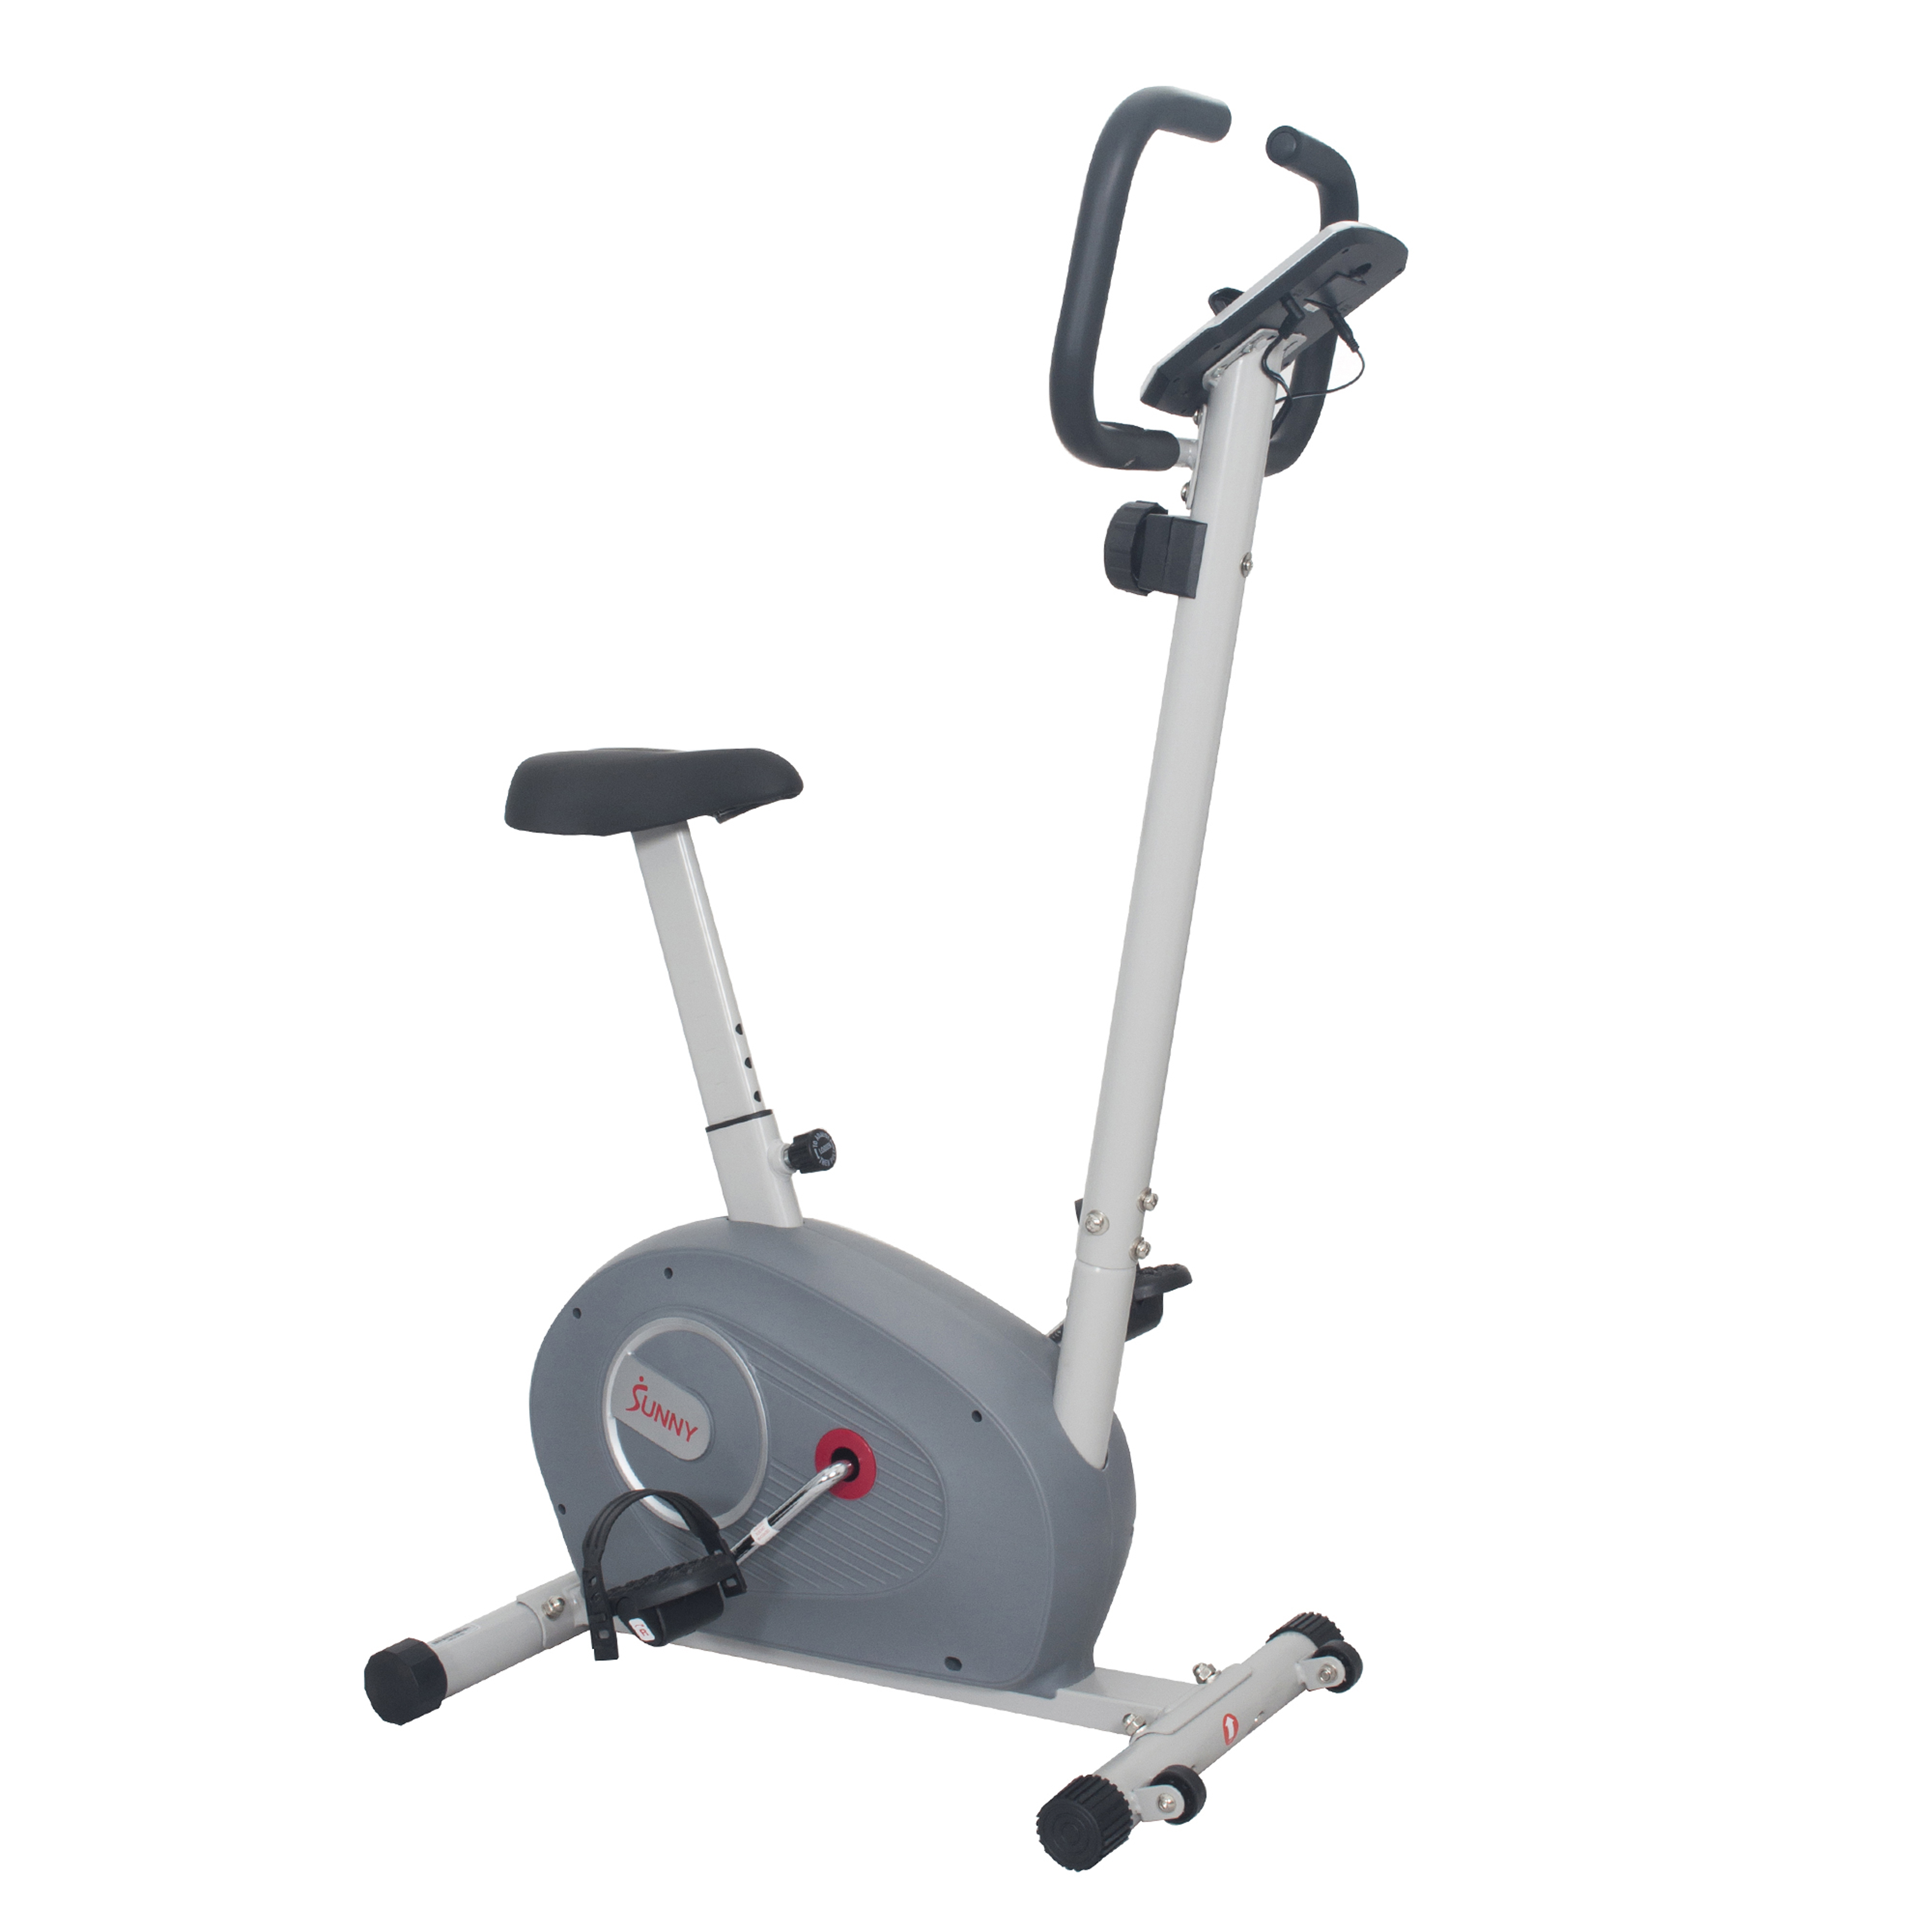 Sunny Health & Fitness Magnetic Resistance Upright Bike - SF-B2906 - image 1 of 8